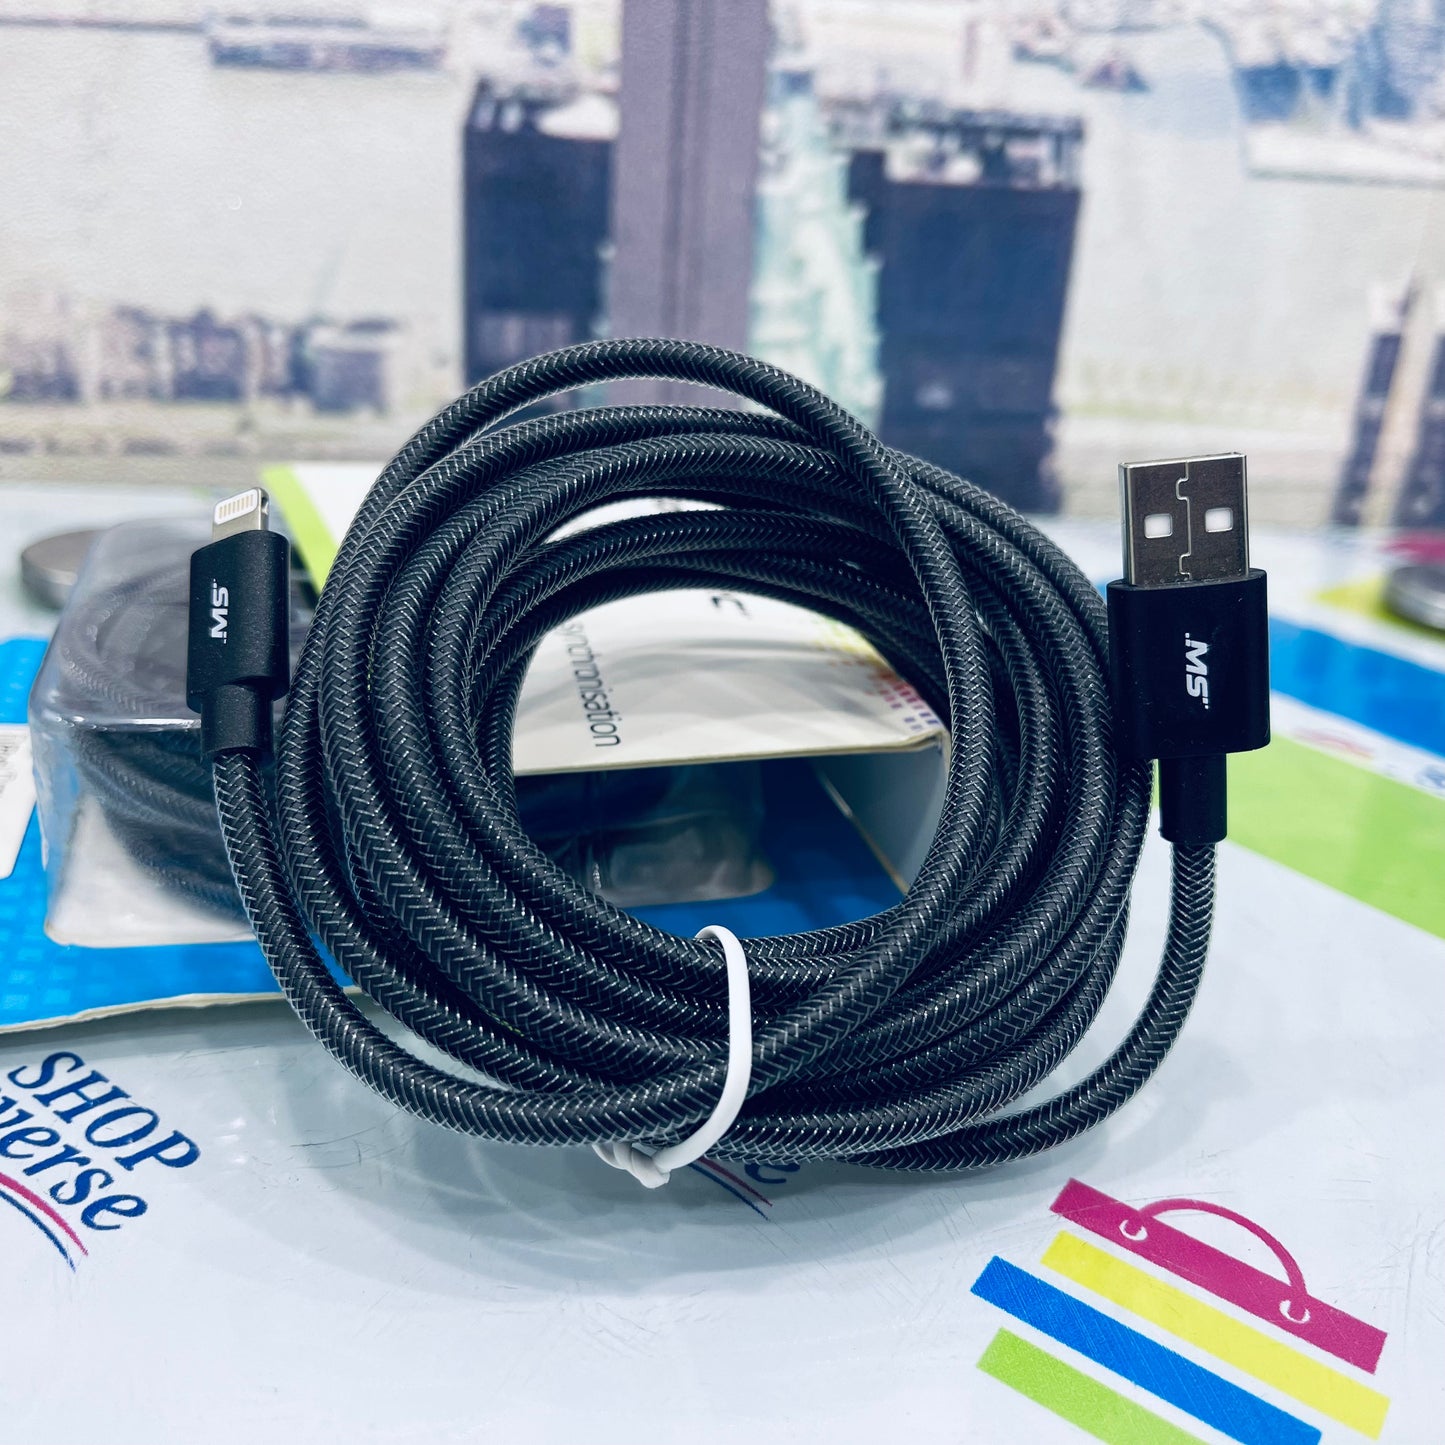 MobileSpec 9" Metallic Charge & Sync Cable SHOPINVERSE